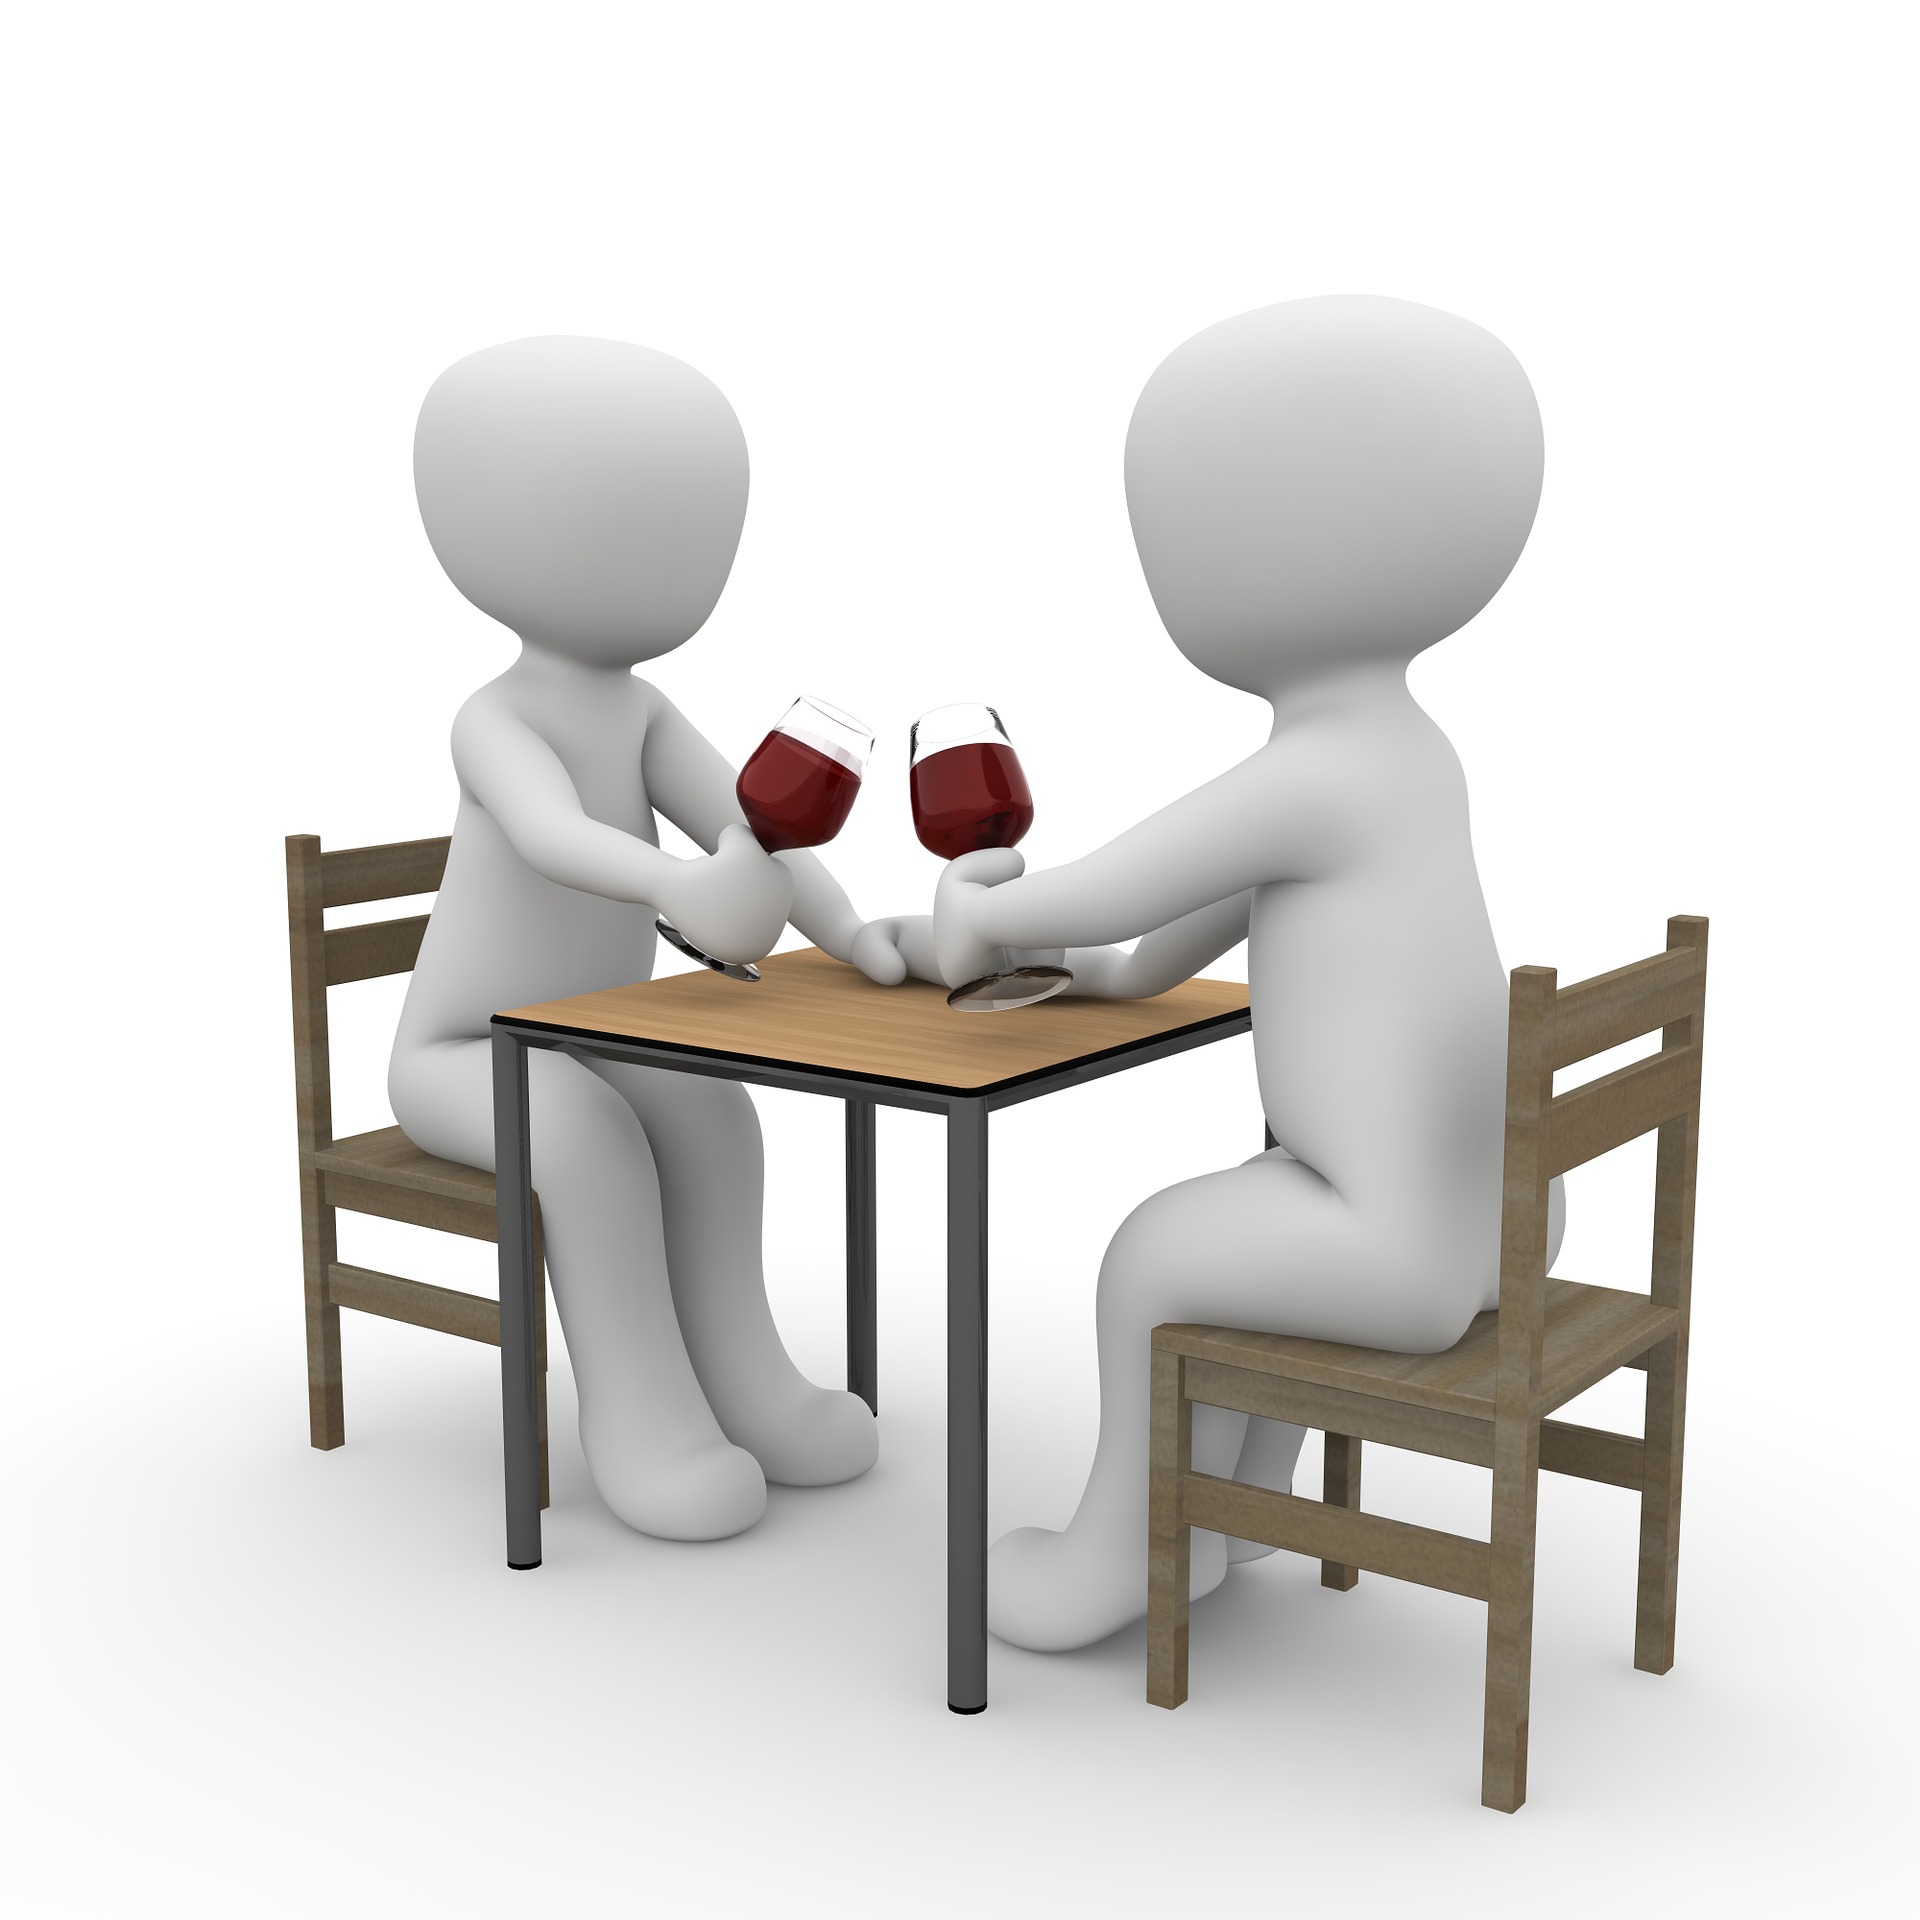 two human figures sit at a table holding glasses of red liquid